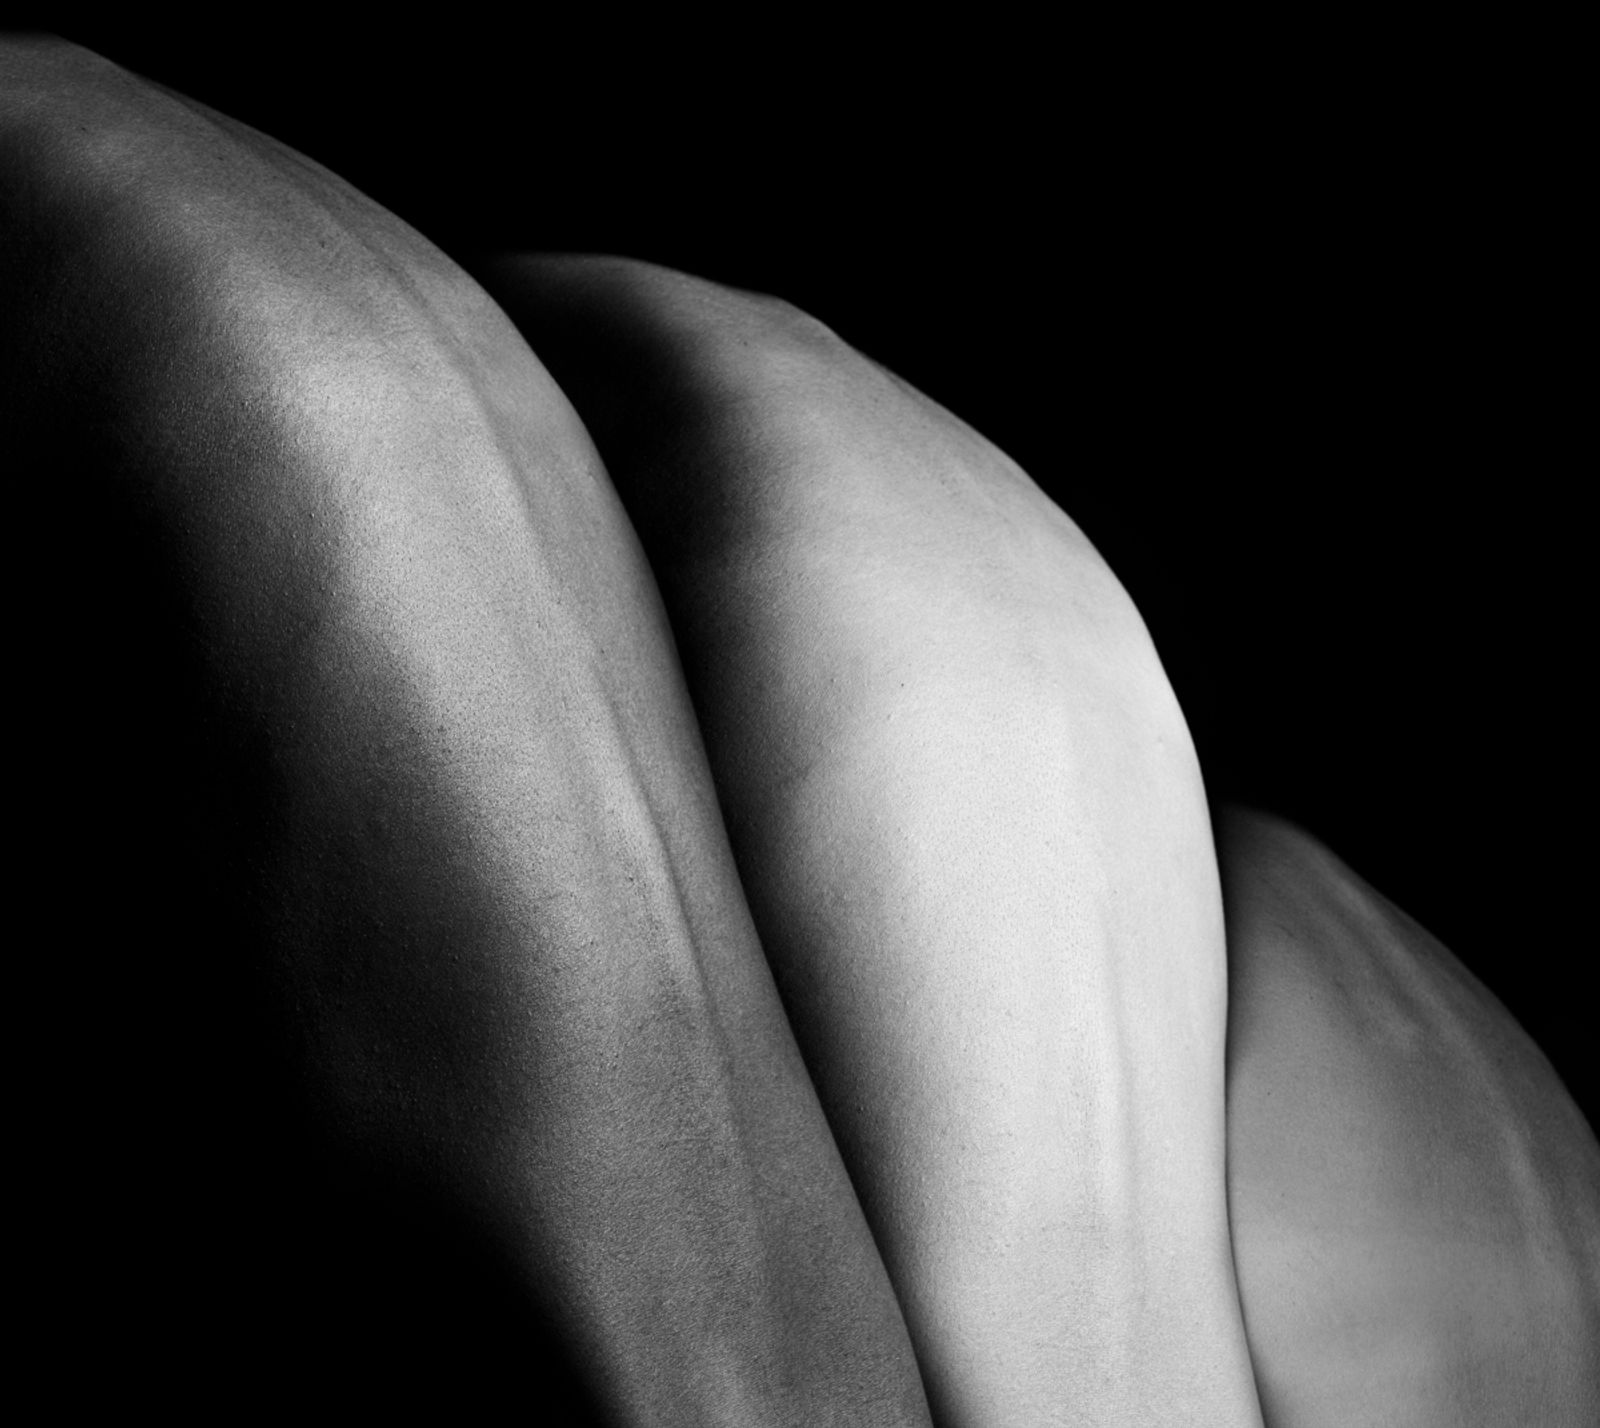 © Sander Vos - Image from the Bodyworks photography project